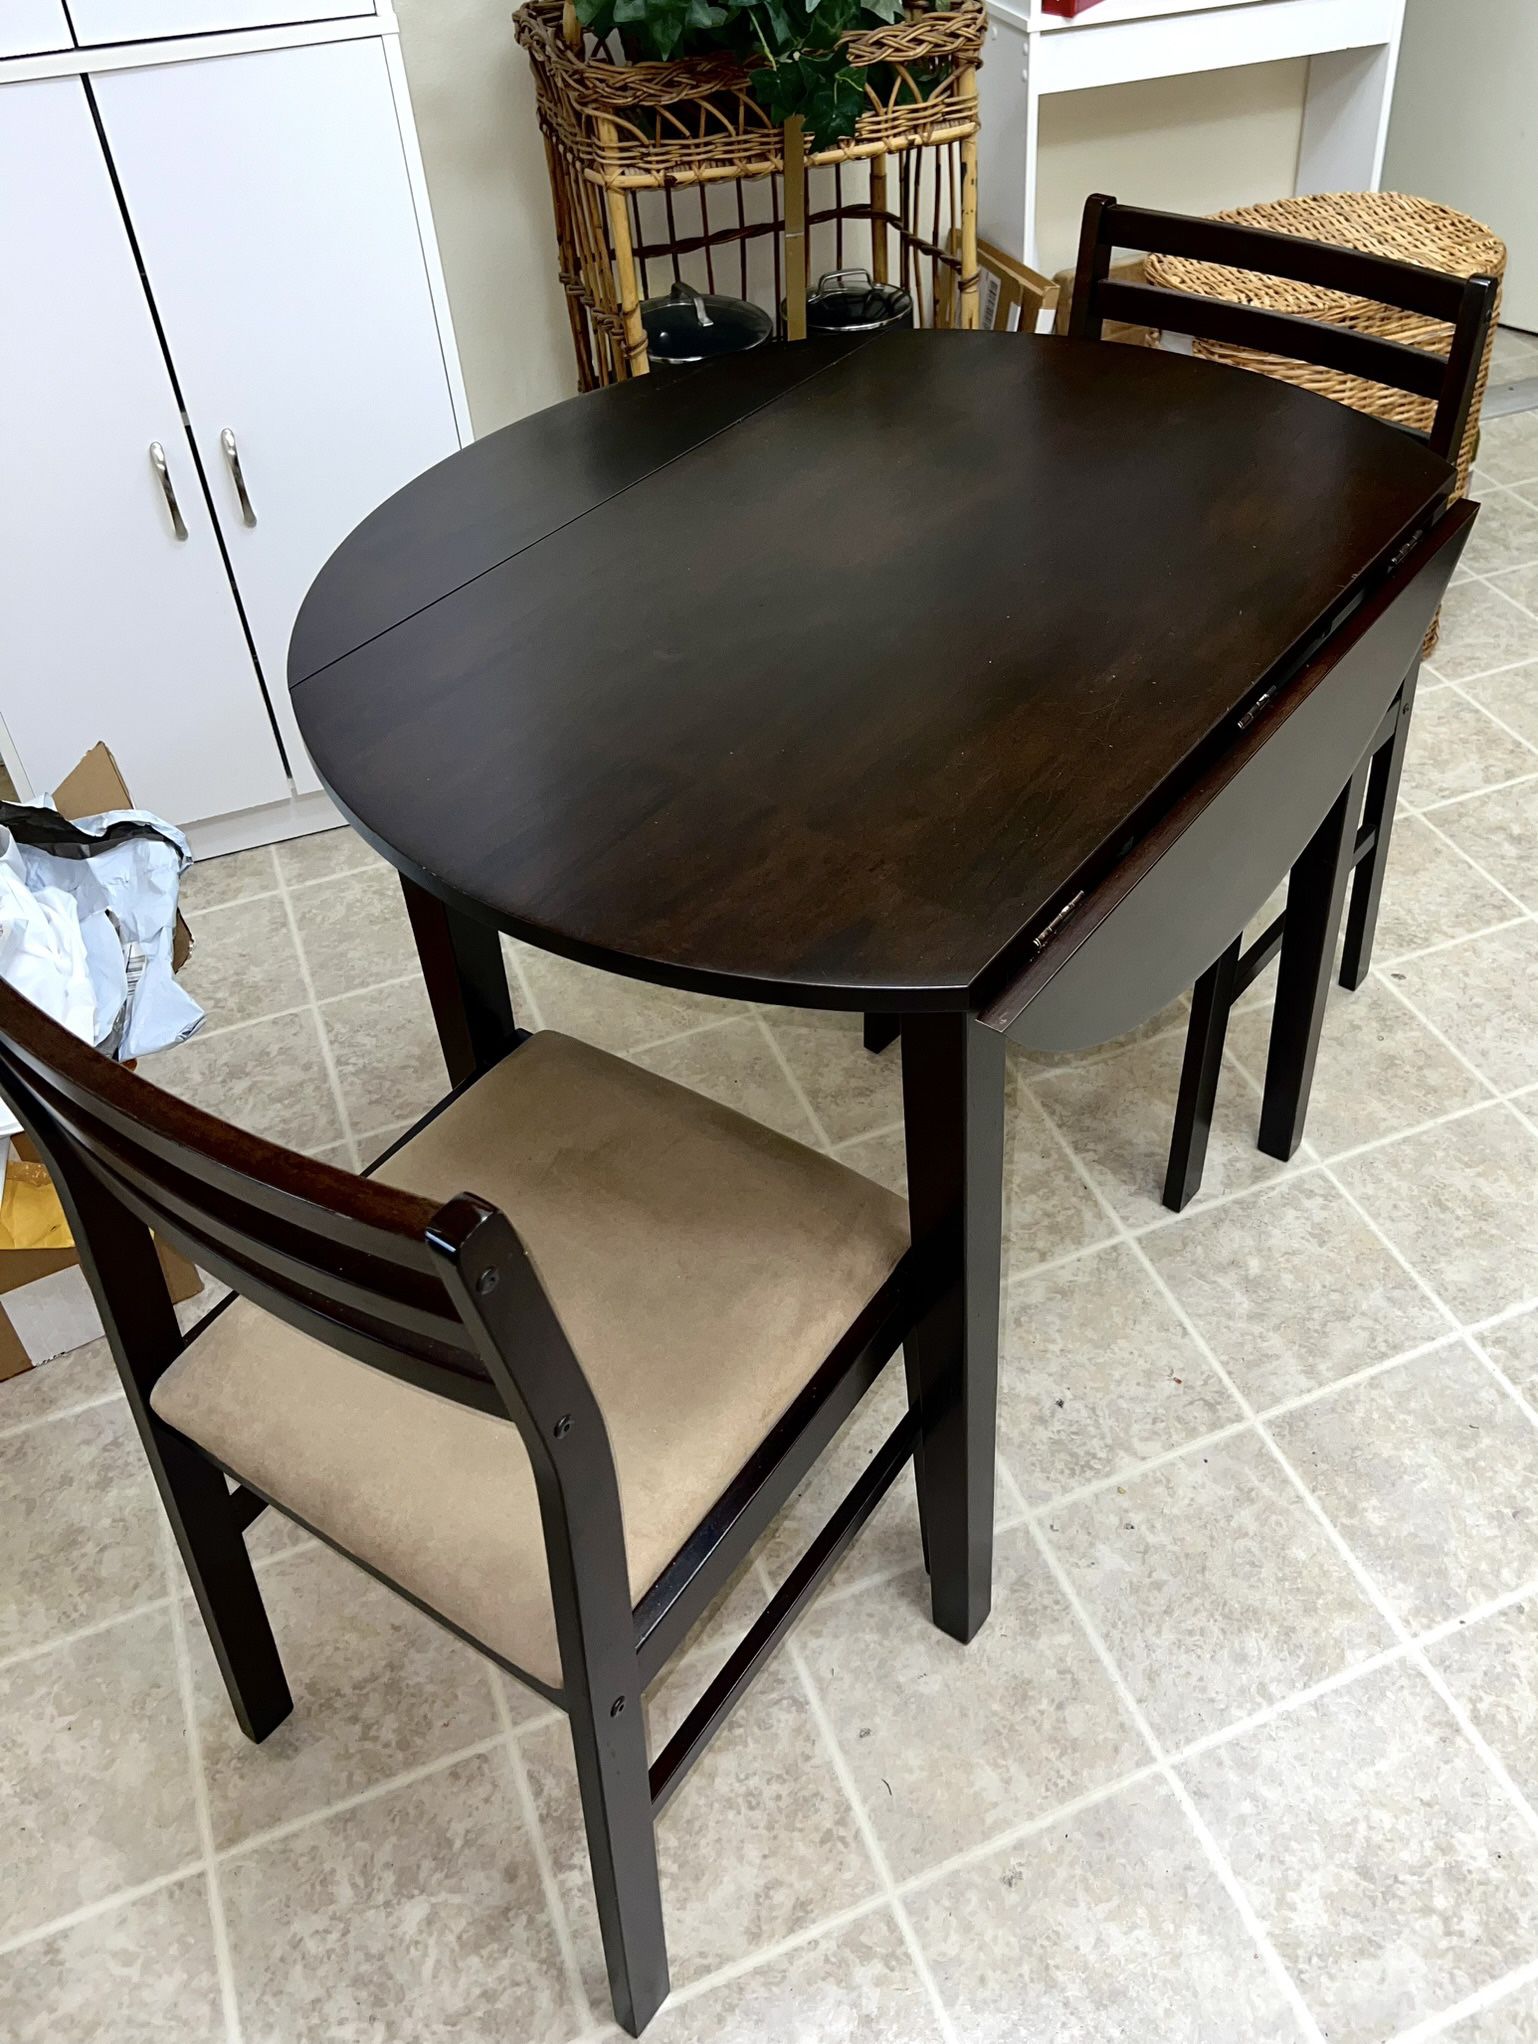 Small Kitchen Table With 2 Chairs 